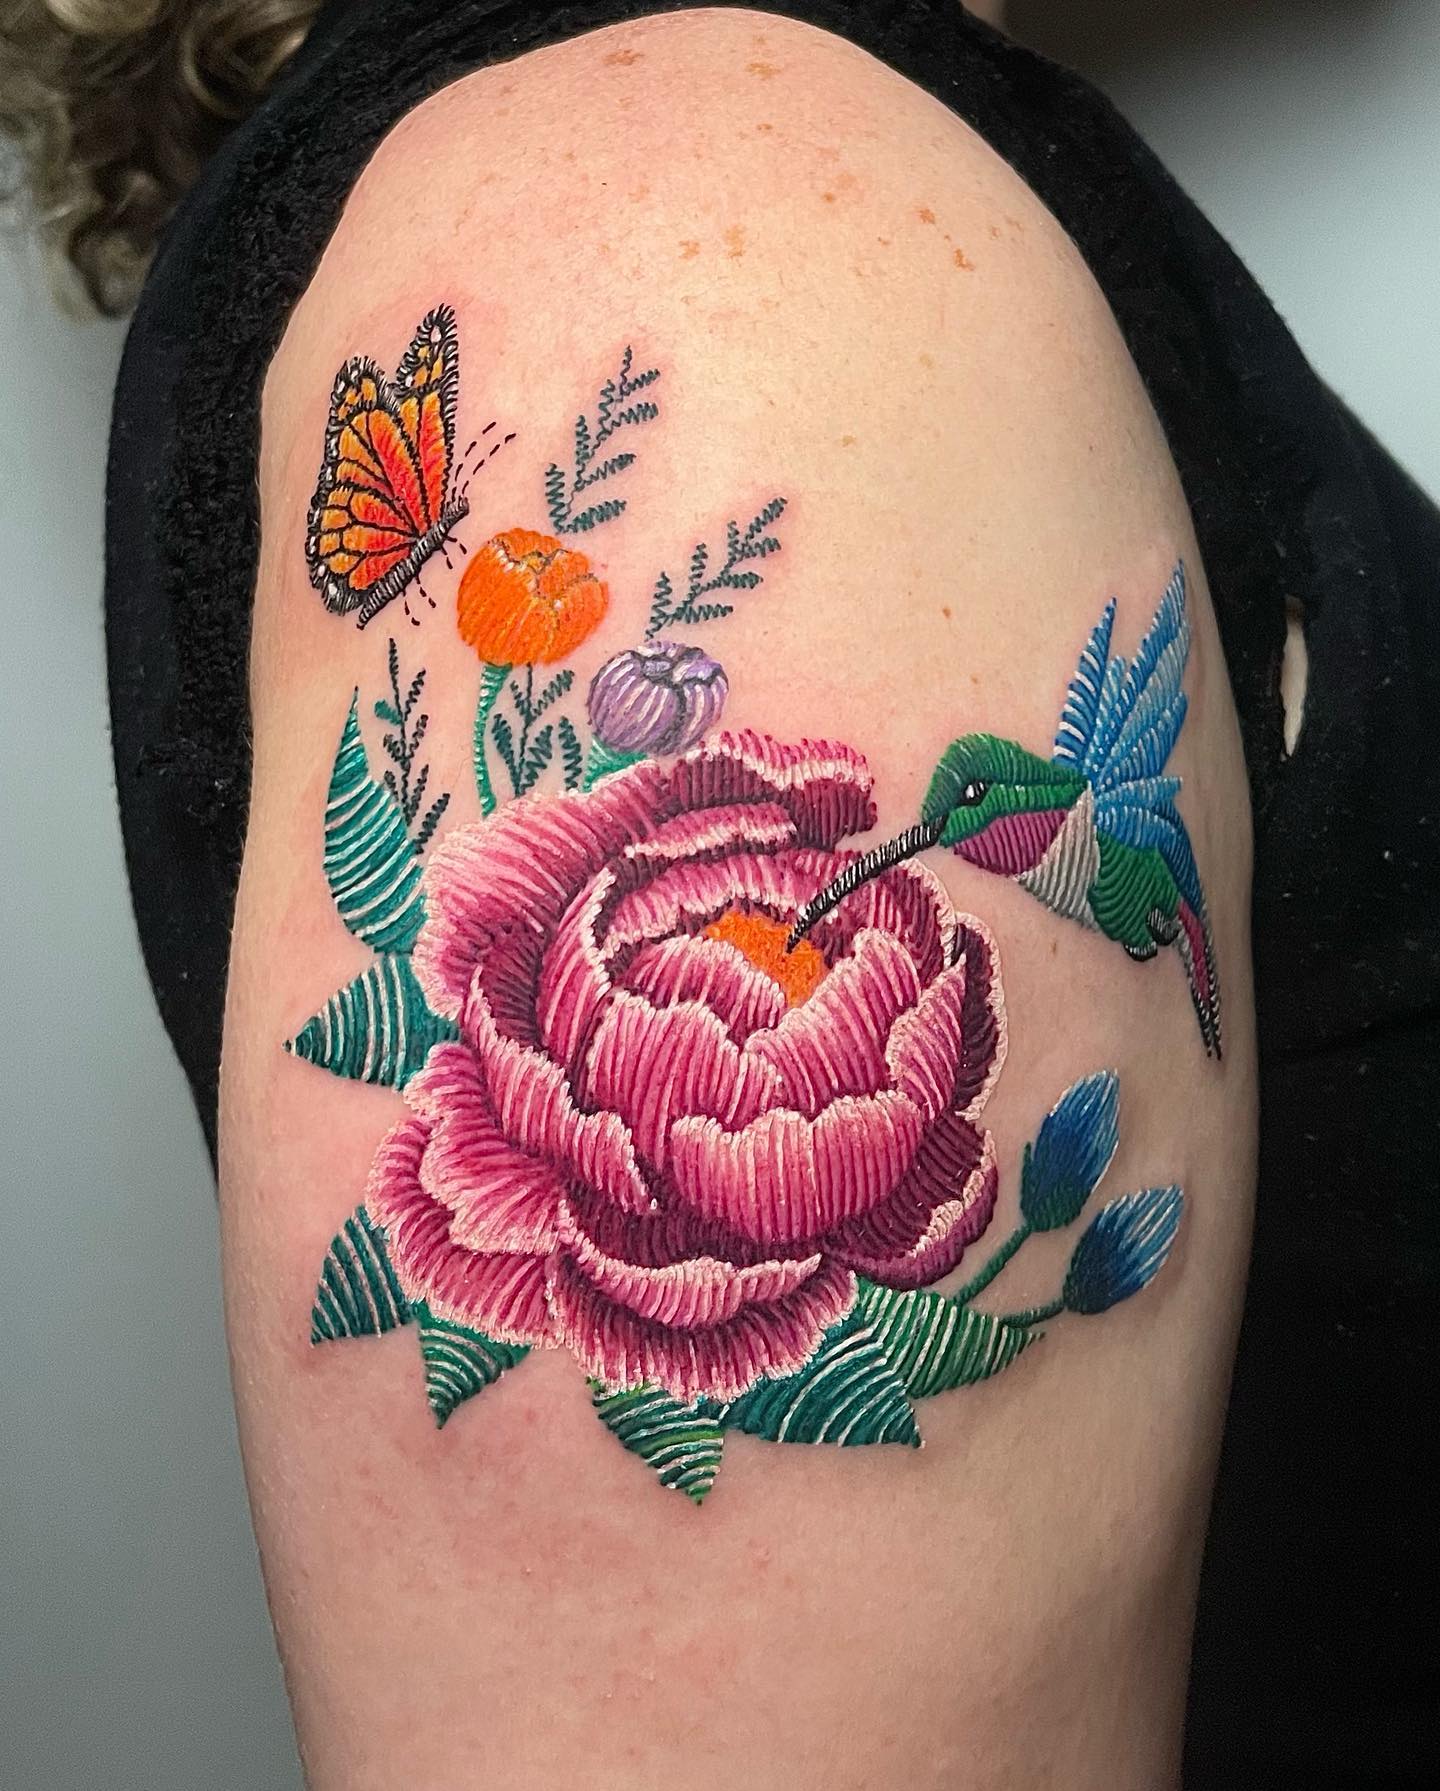 Peony flower embroidery tattoo composition on shoulder